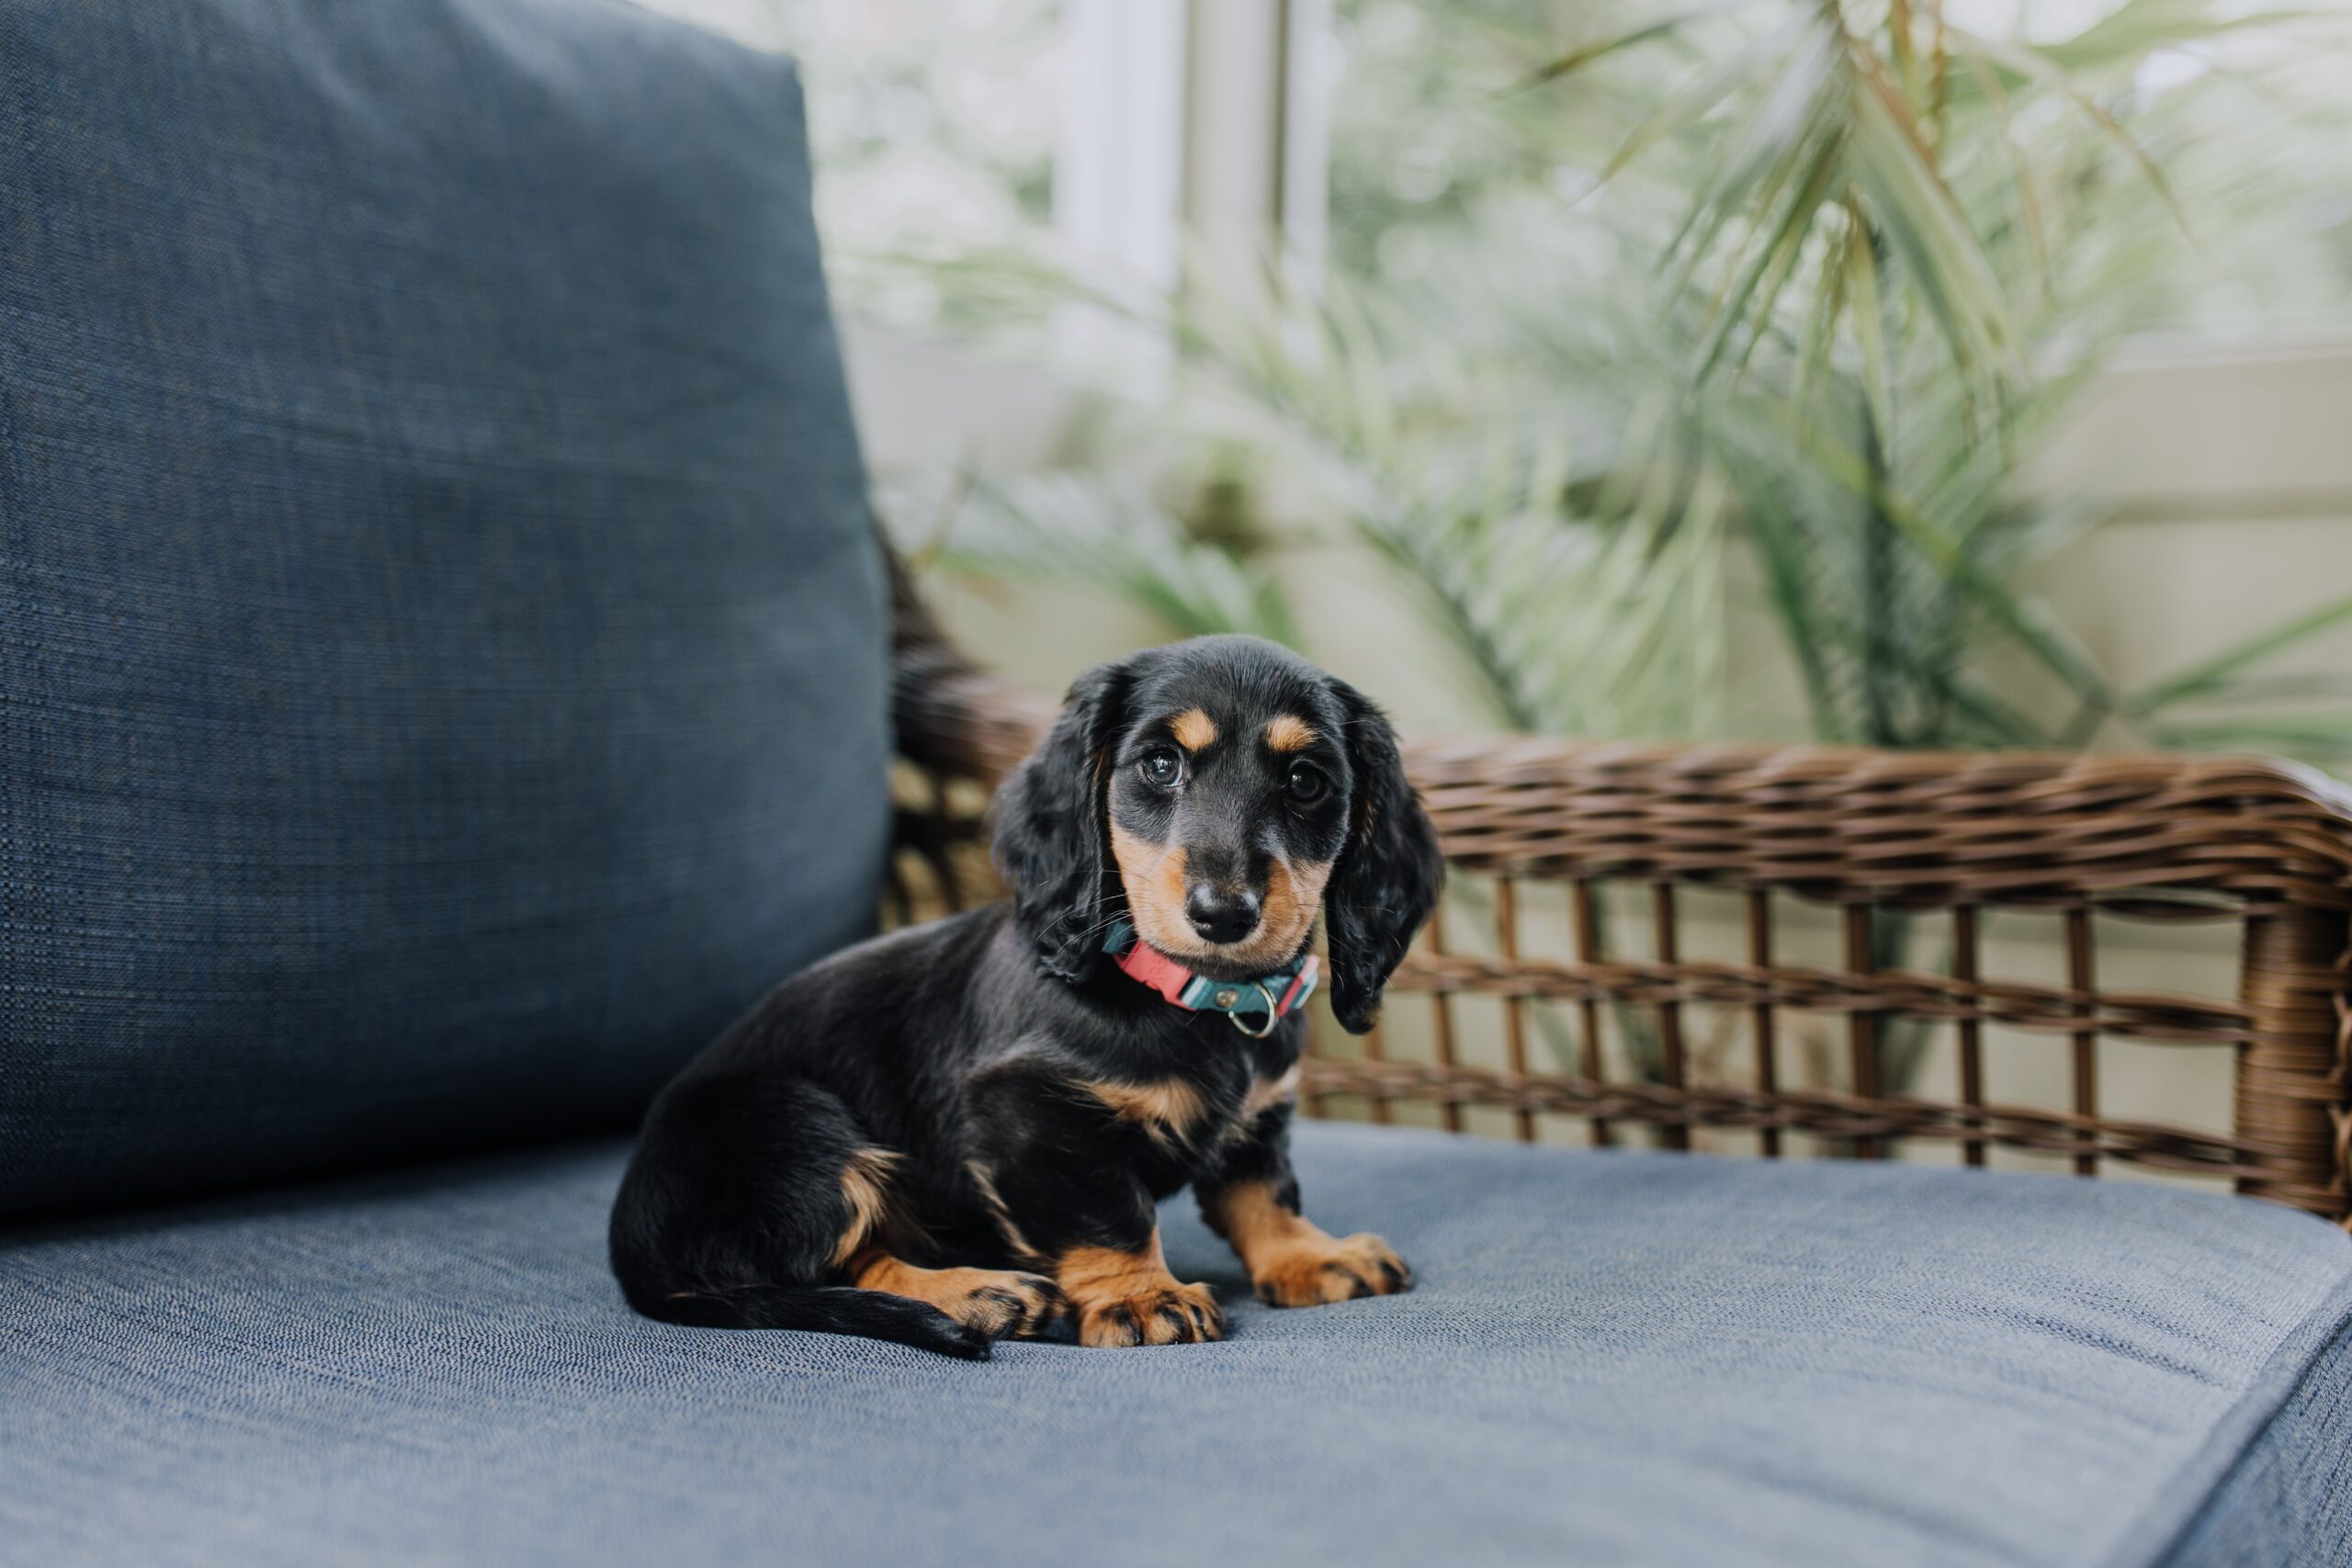 Two secrets to ensure your dachshund never pees on the carpet again